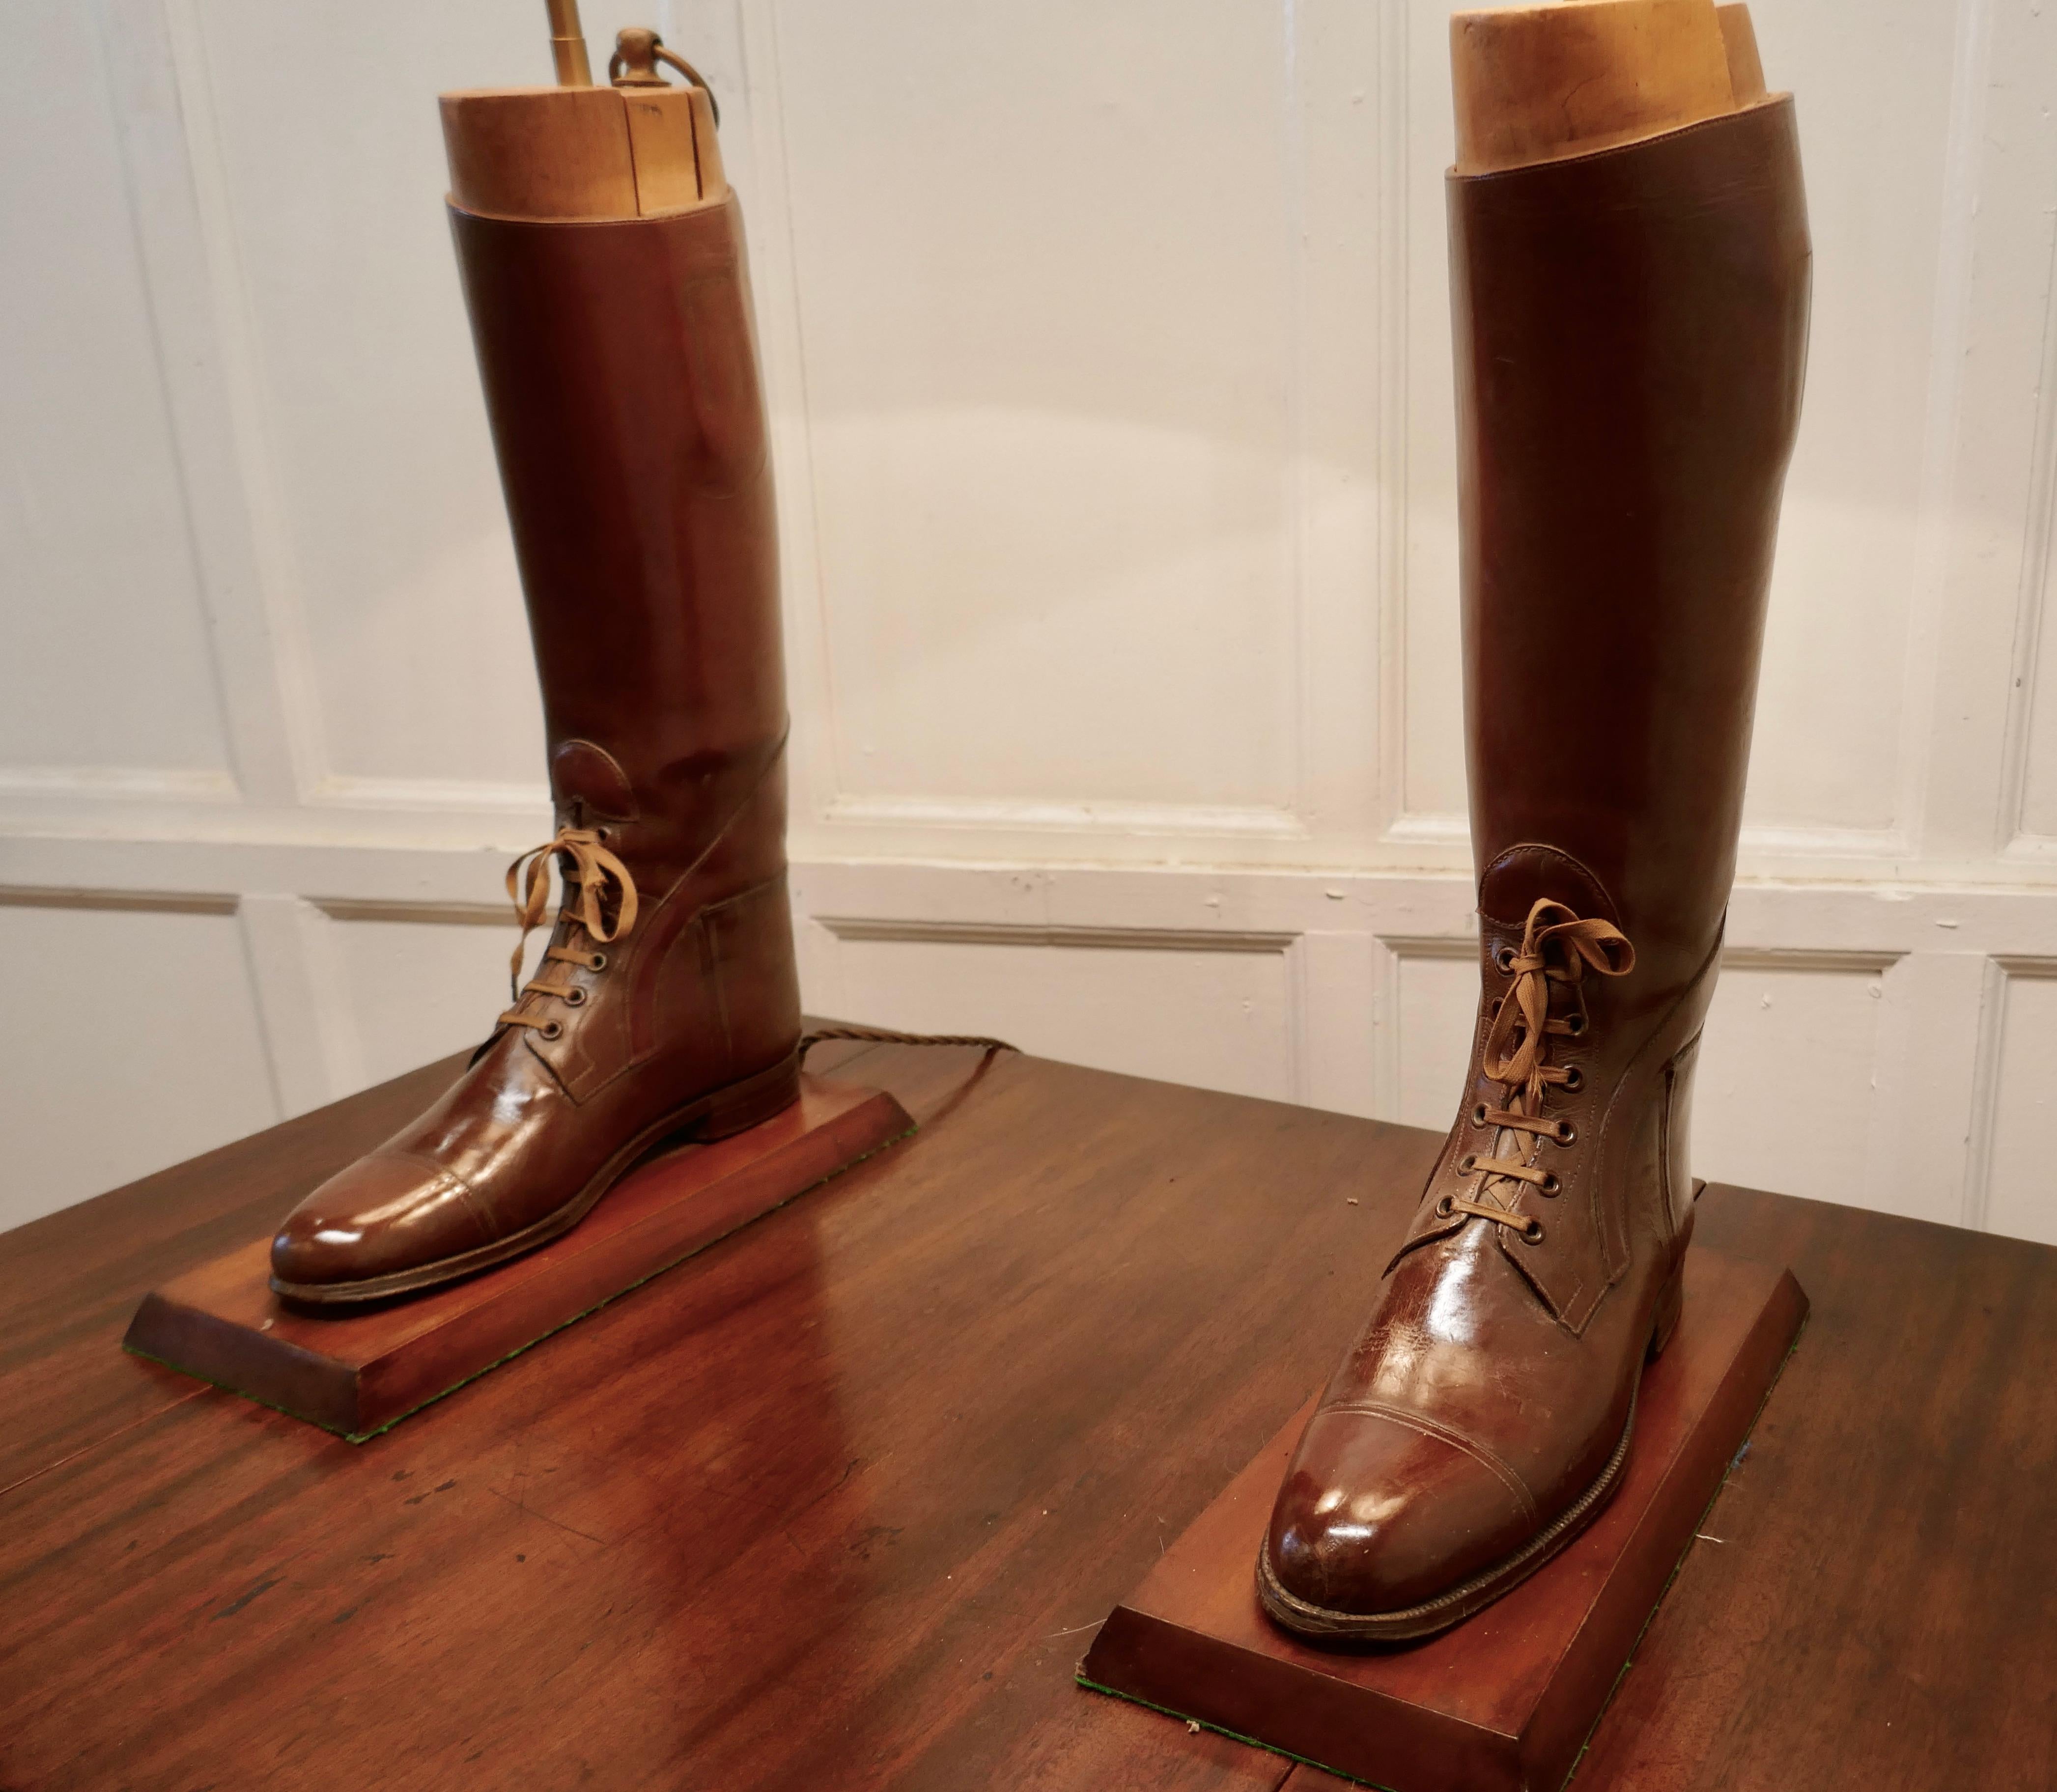 Folk Art Pair of Boot Lamps, Made from Early 20th Century Cavalry Officer’s Riding Boots